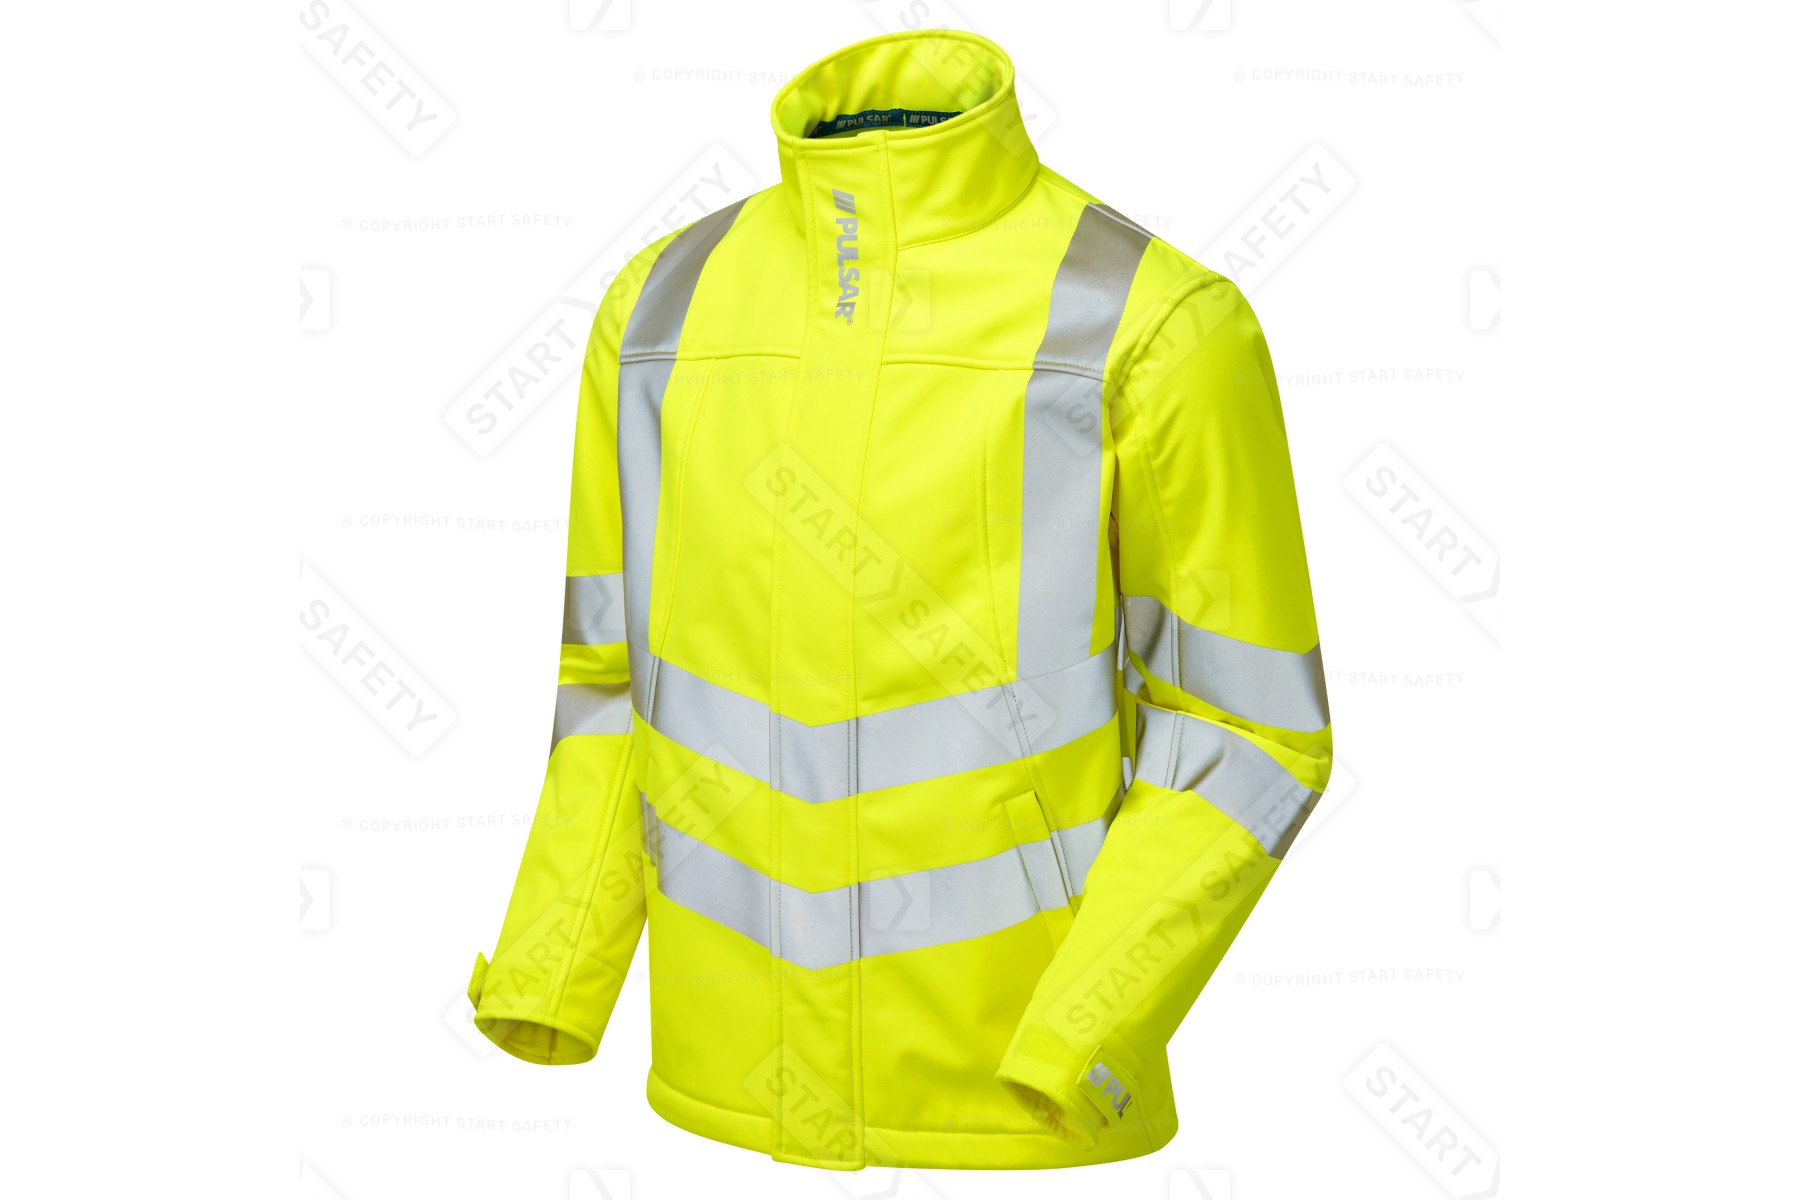 No Exposed Hard Points On Pulsar P534 Soft Shell Jacket